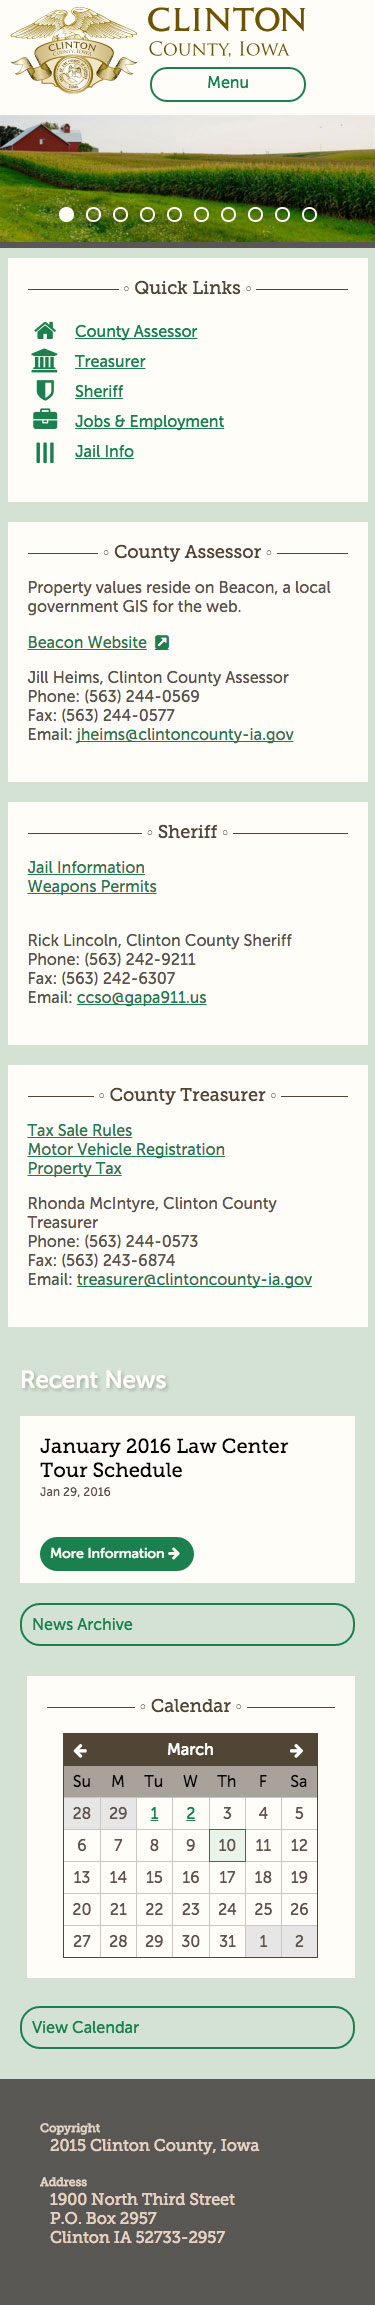 Clinton County mobile home page screenshot